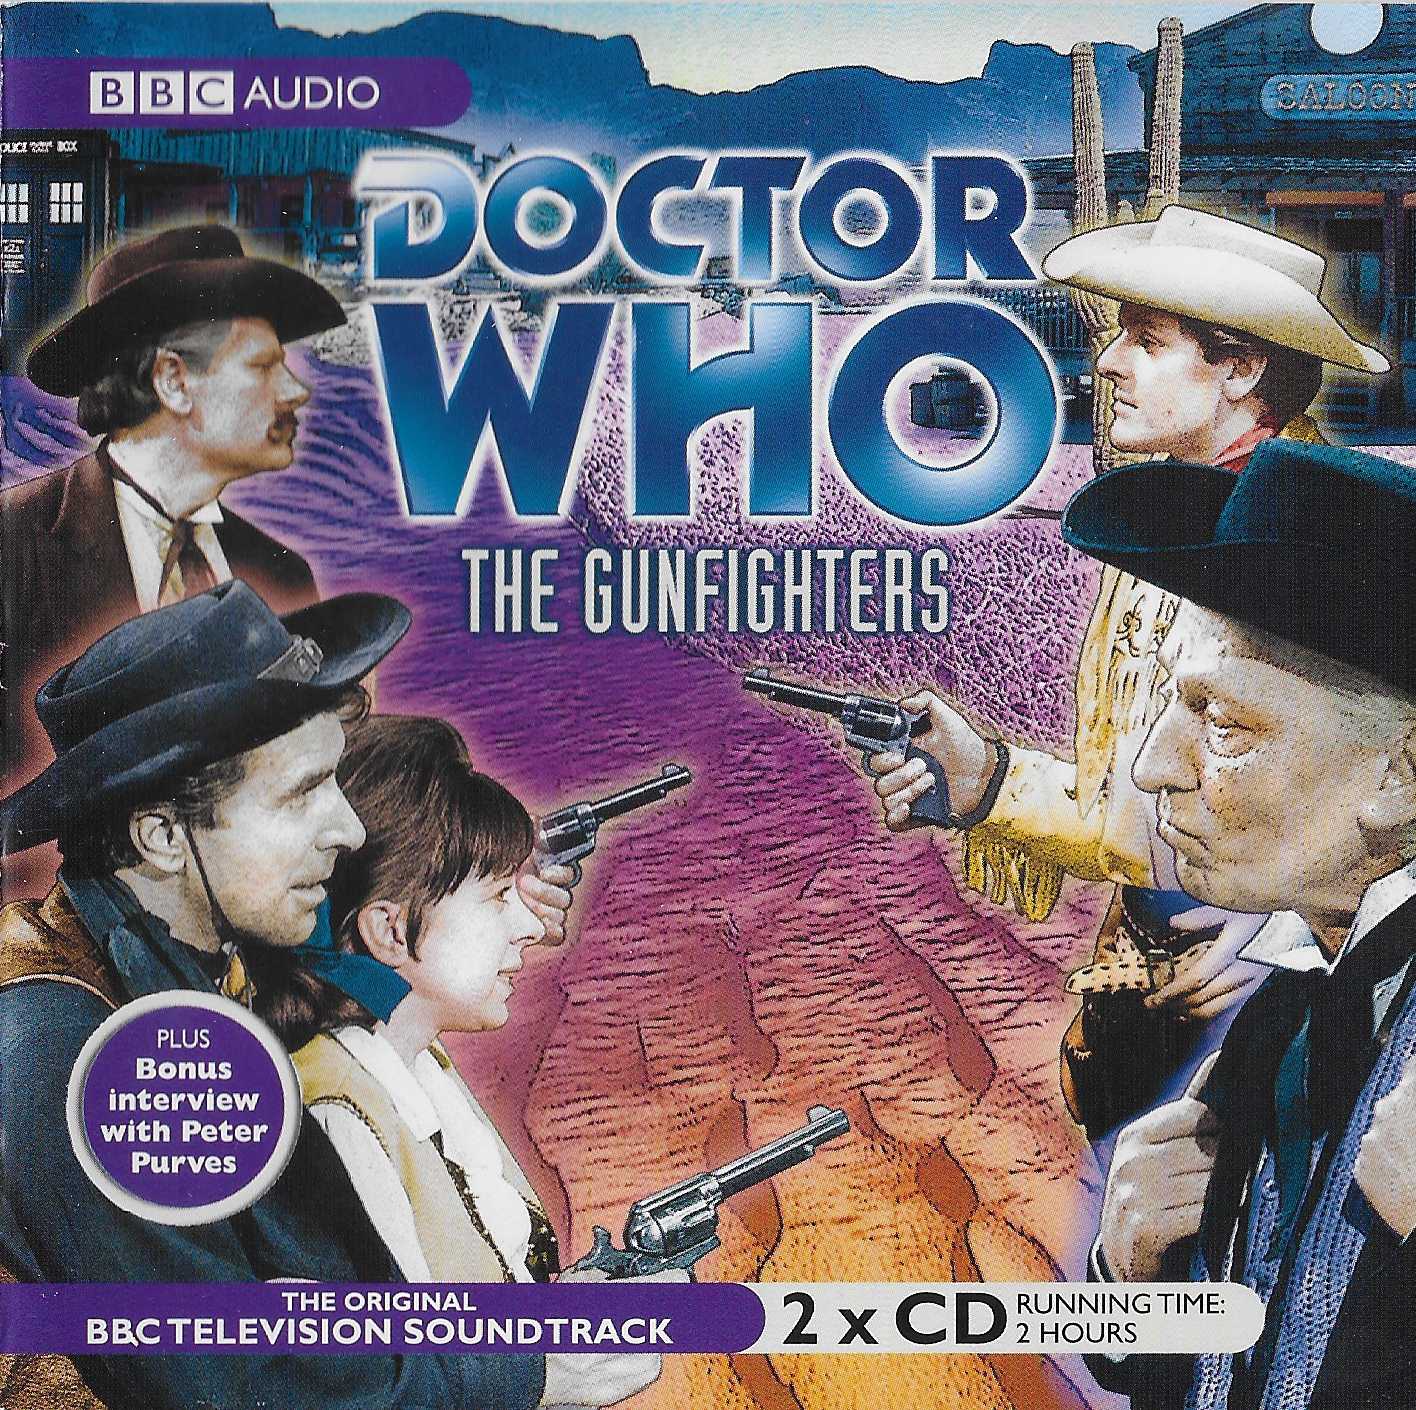 Picture of Doctor Who - The gunfighters by artist Donald Cottom from the BBC cds - Records and Tapes library